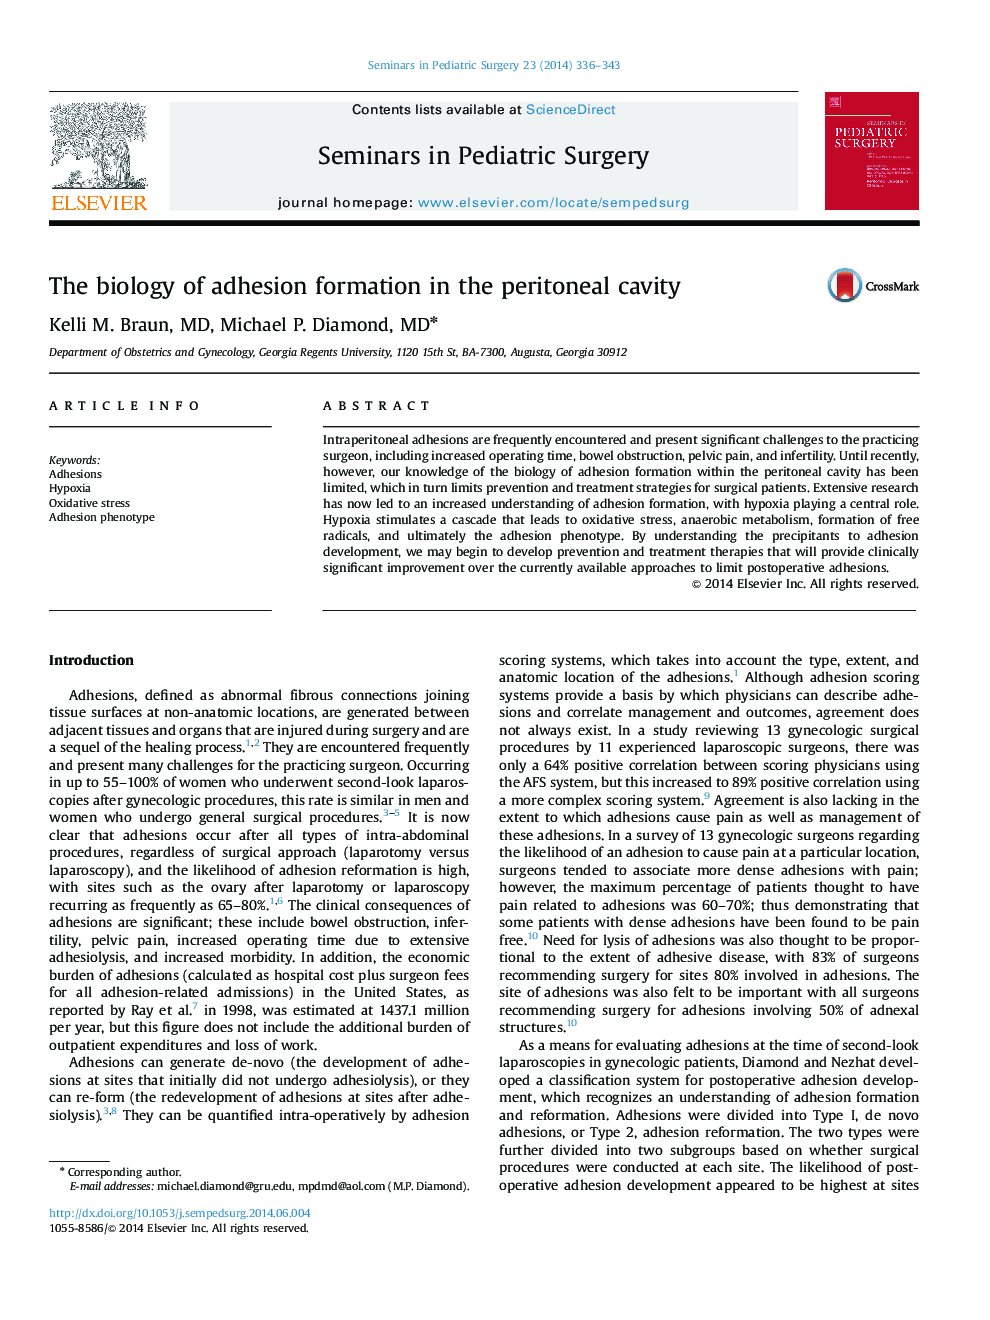 The biology of adhesion formation in the peritoneal cavity